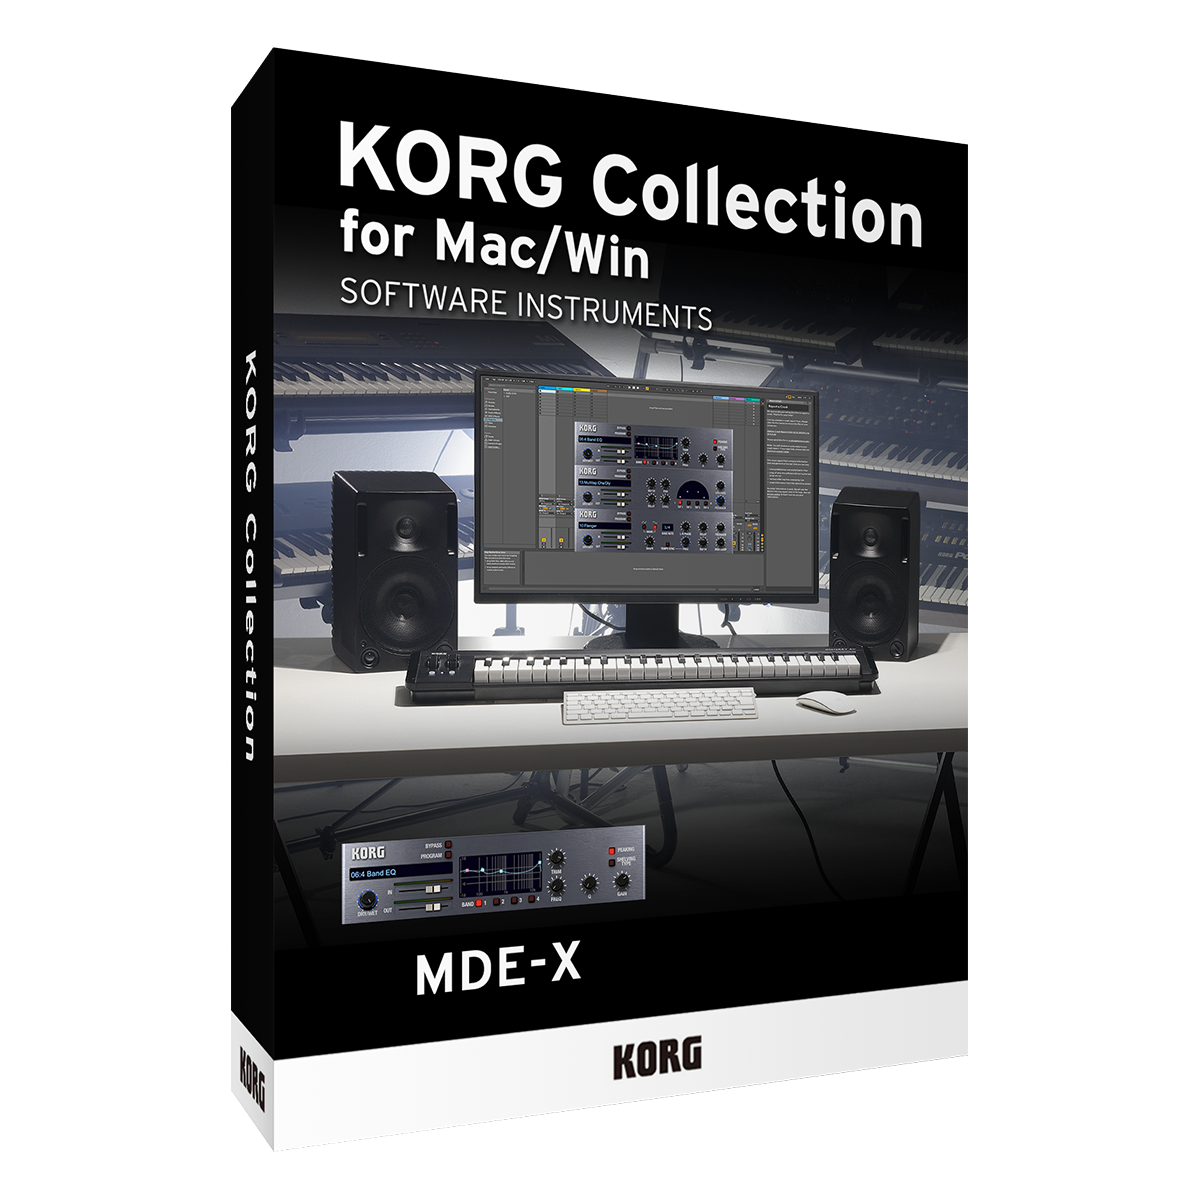 KORG Collection 3 - MDE-X